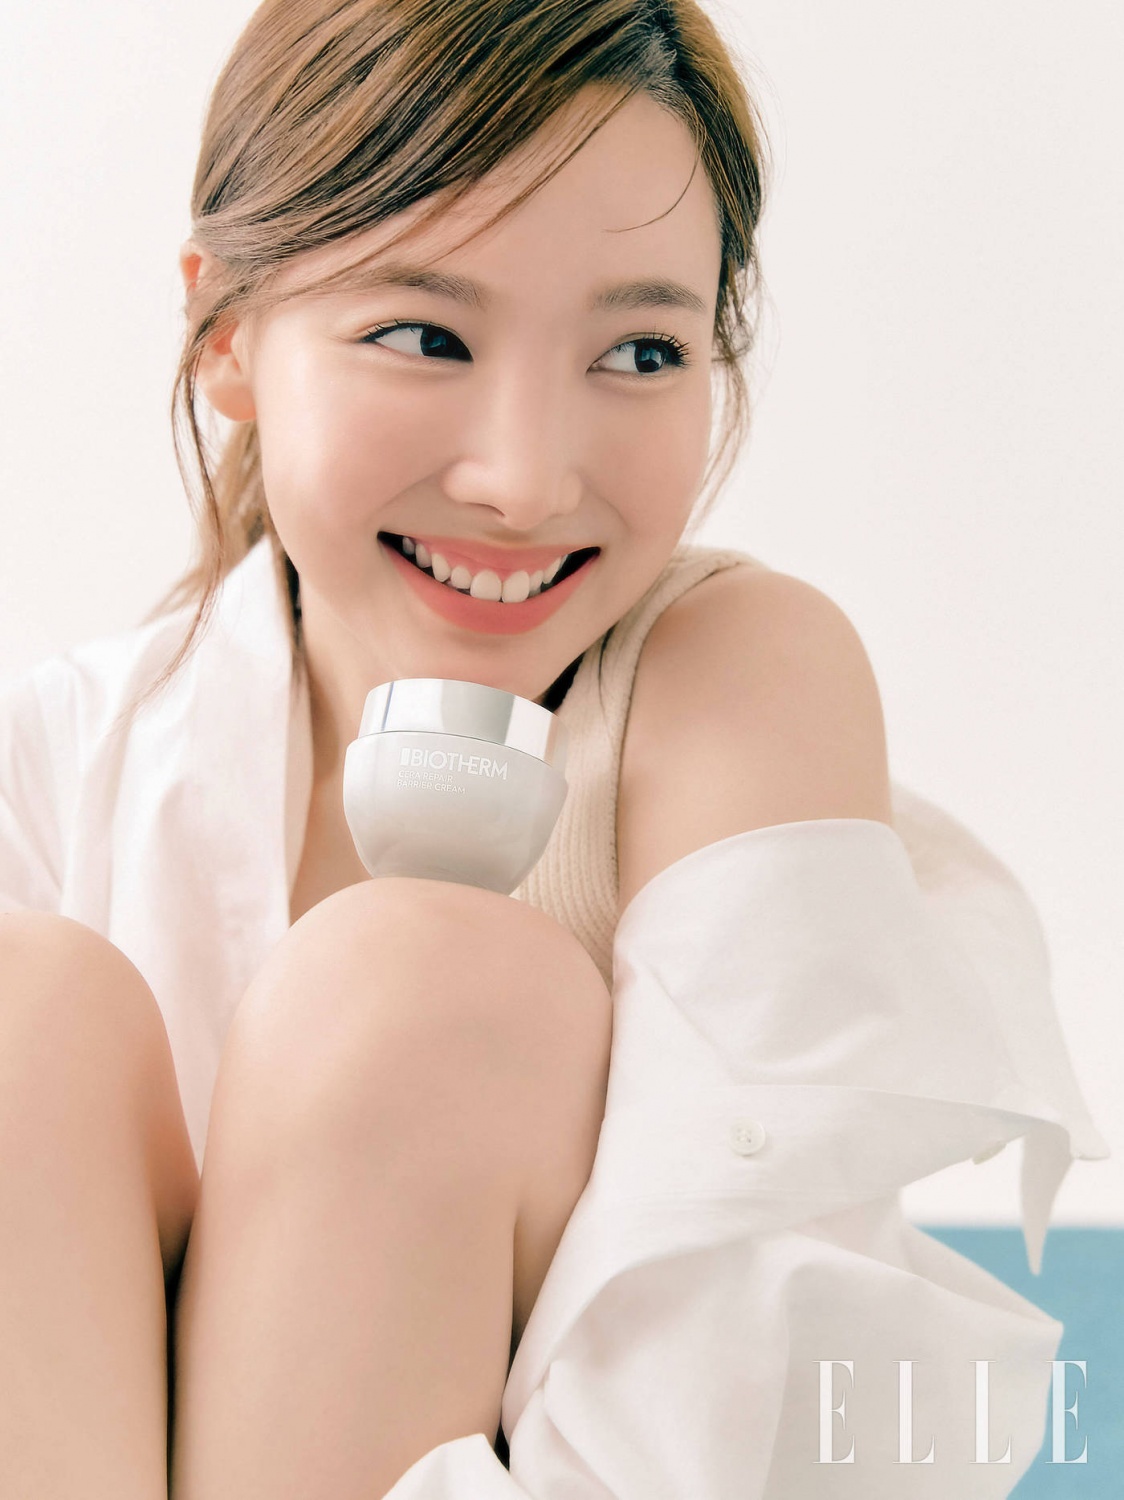 Interview: Twice's Nayeon on Making Her Solo Debut